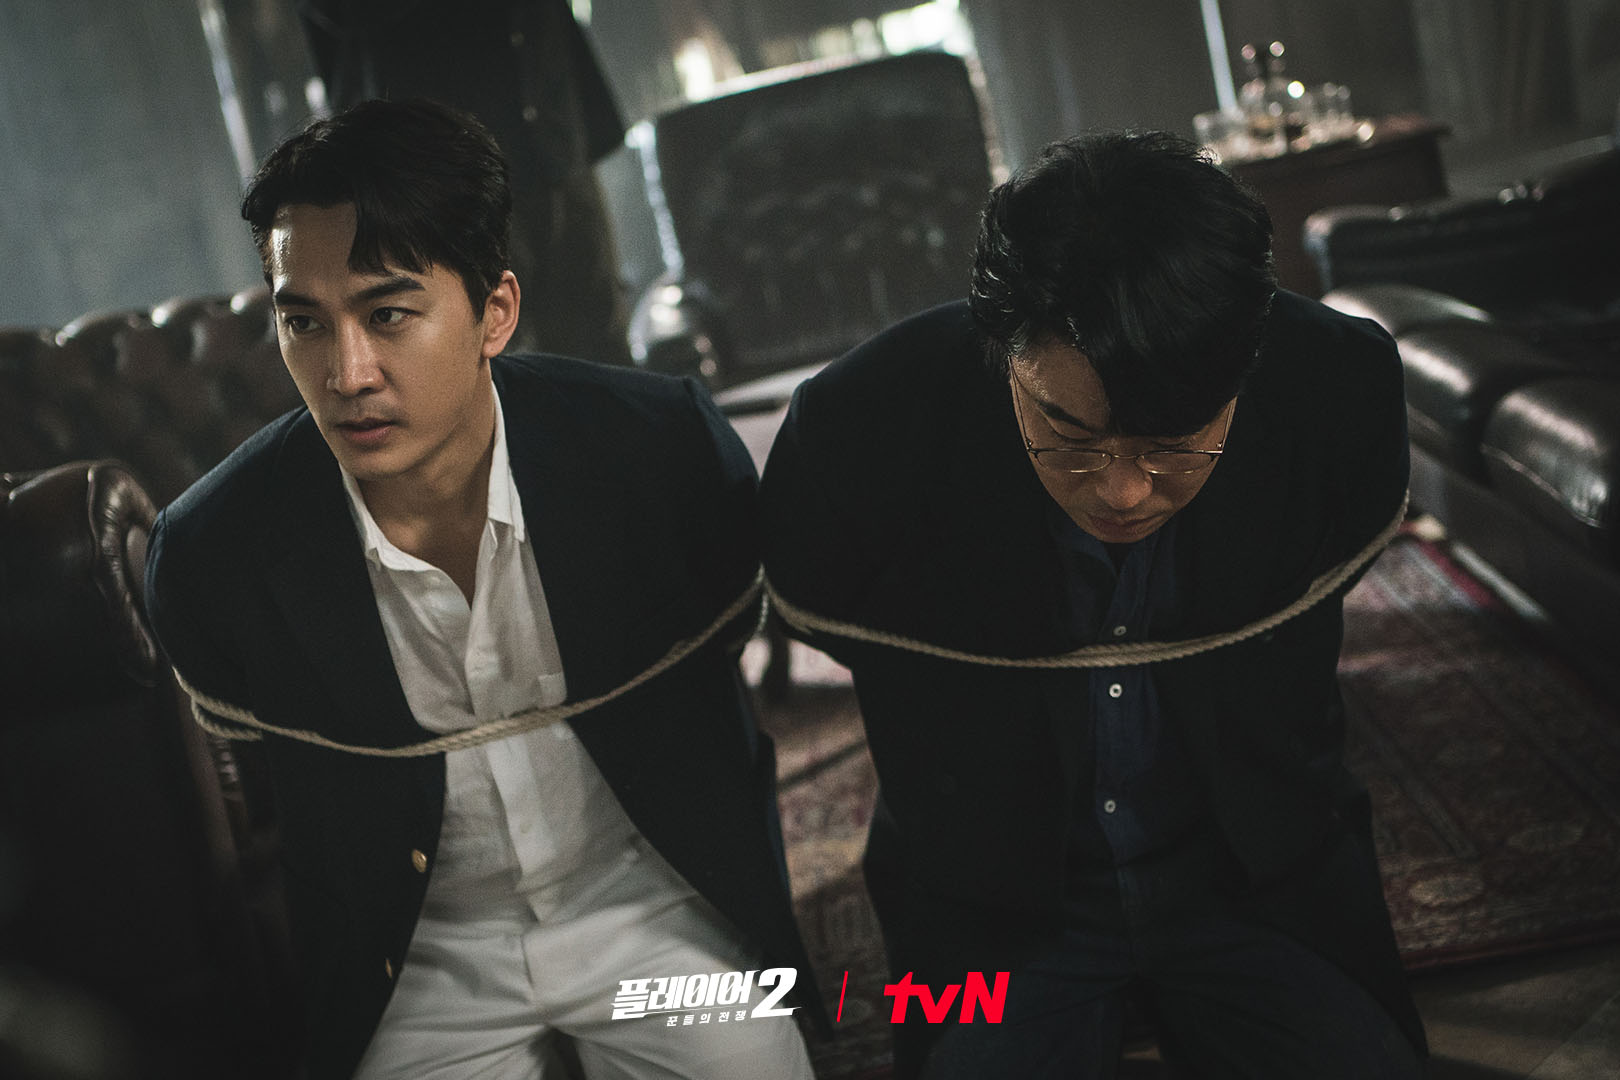 Song Seung Heon And Lee Si Eon Fall Into Oh Yeon Seo’s Trap In “The Player 2: Master Of Swindlers”